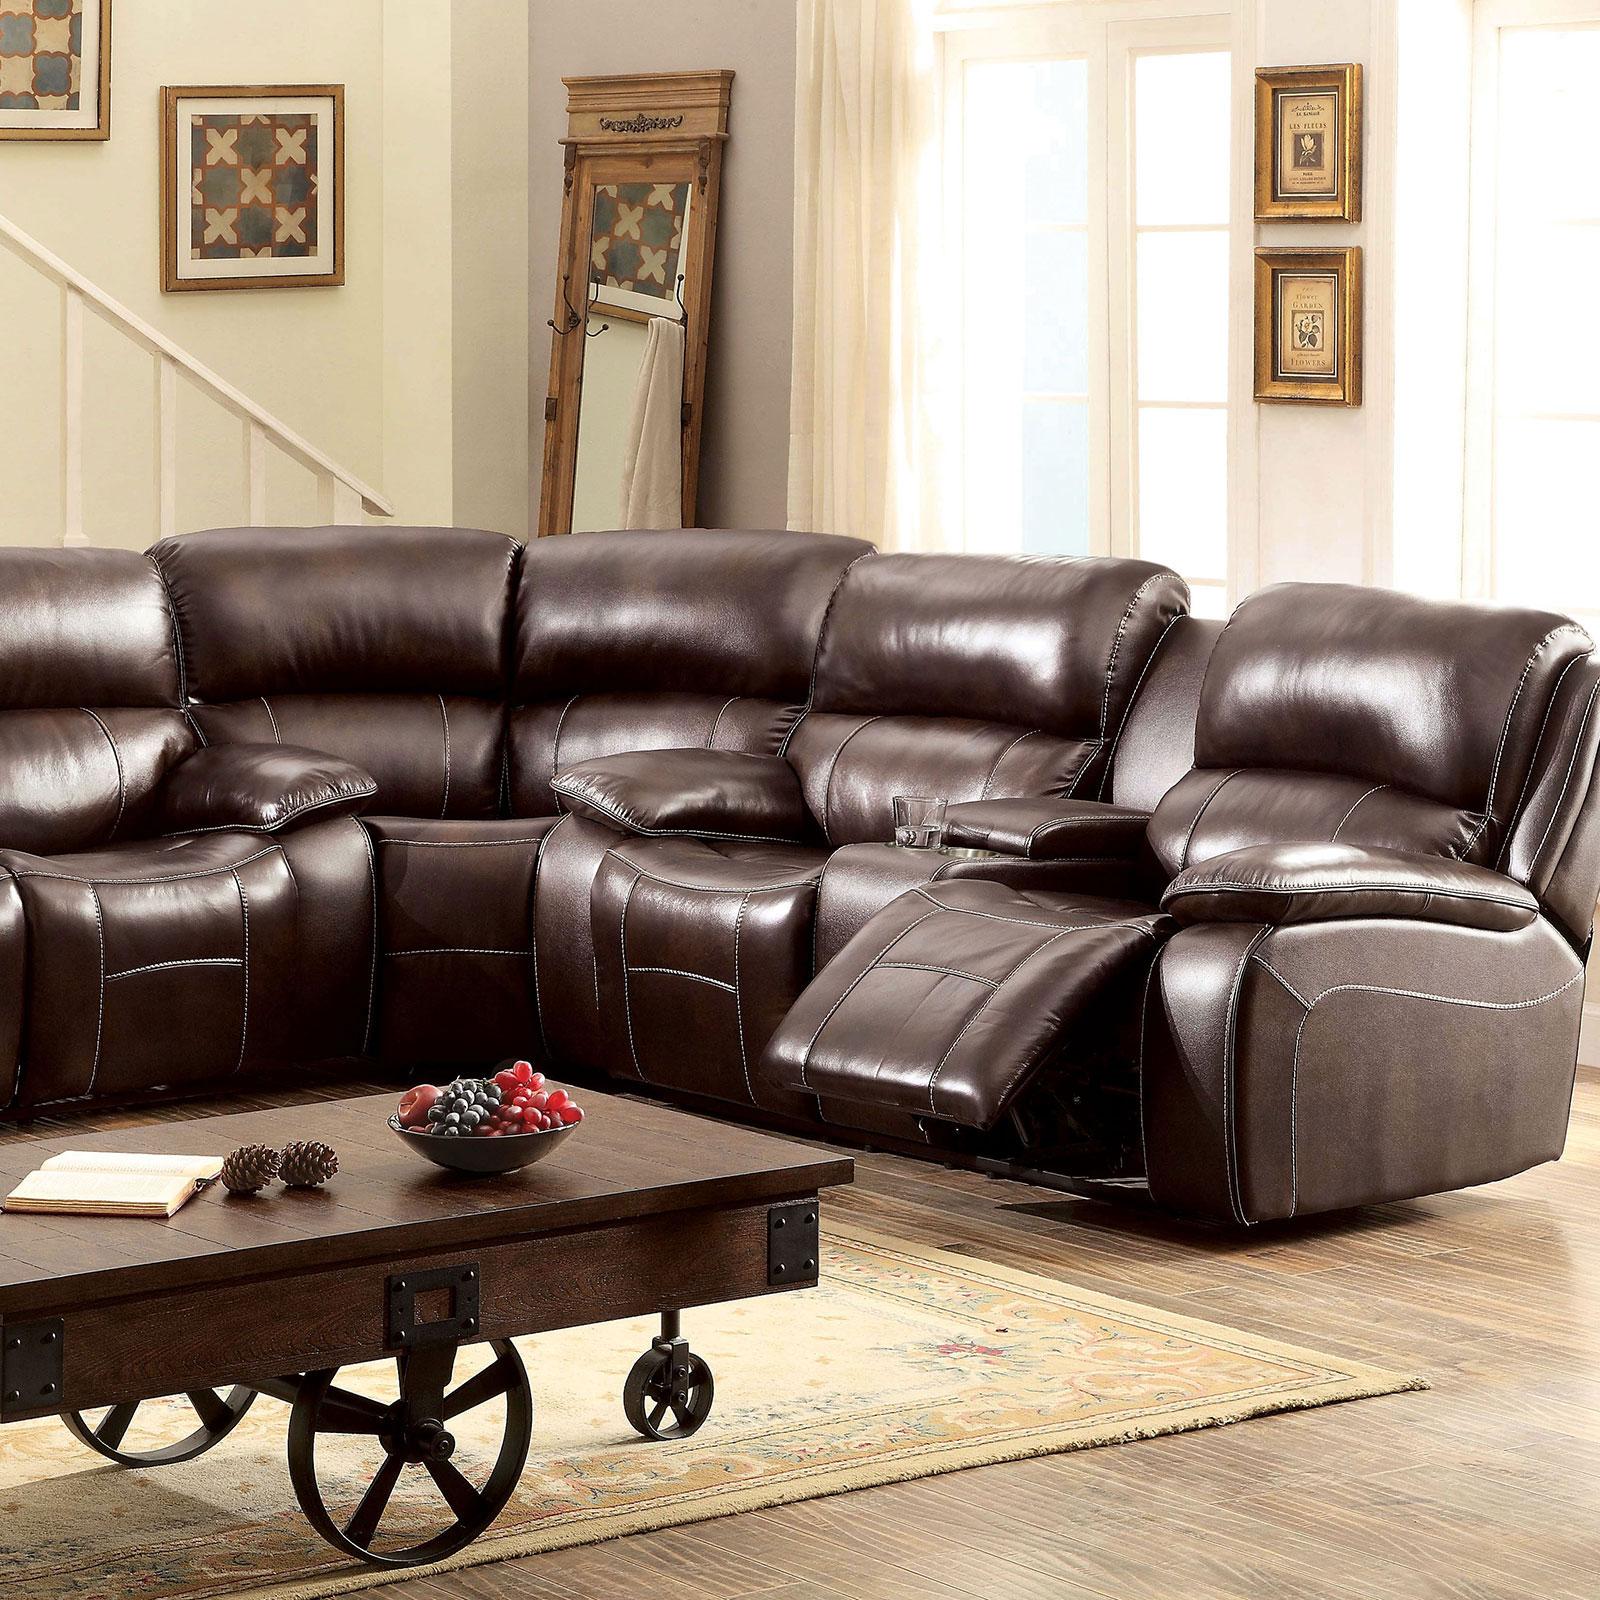 Transitional Sectional Sofa RUTH CM6783BR-CNR CM6783BR-CNR in Brown Faux Leather